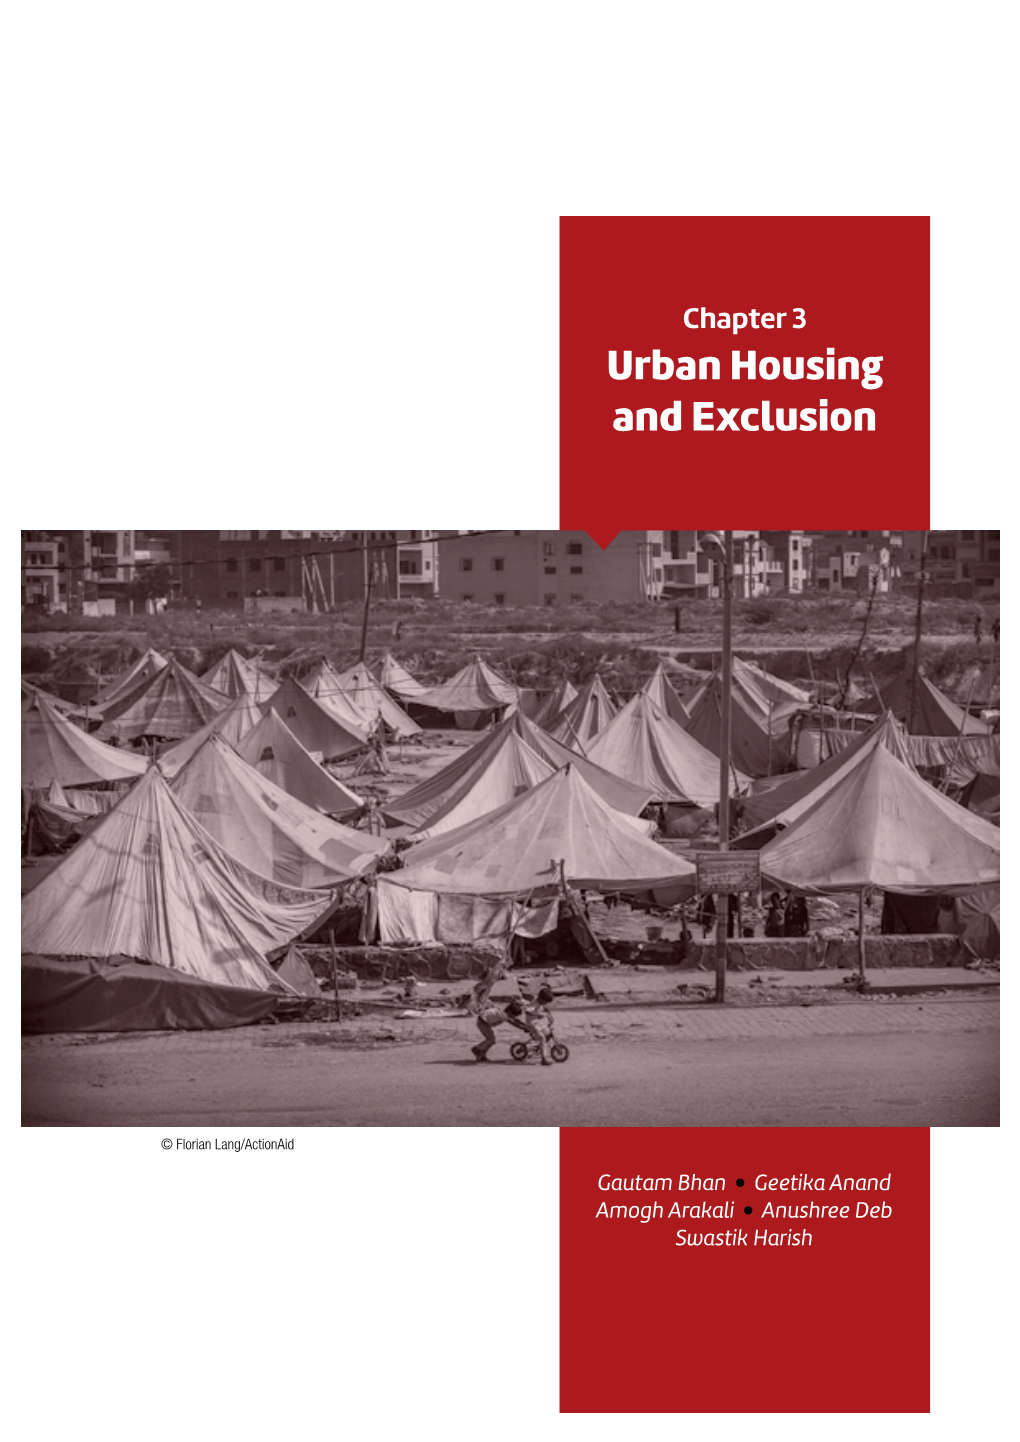 Chapter 3 Urban Housing and Exclusion